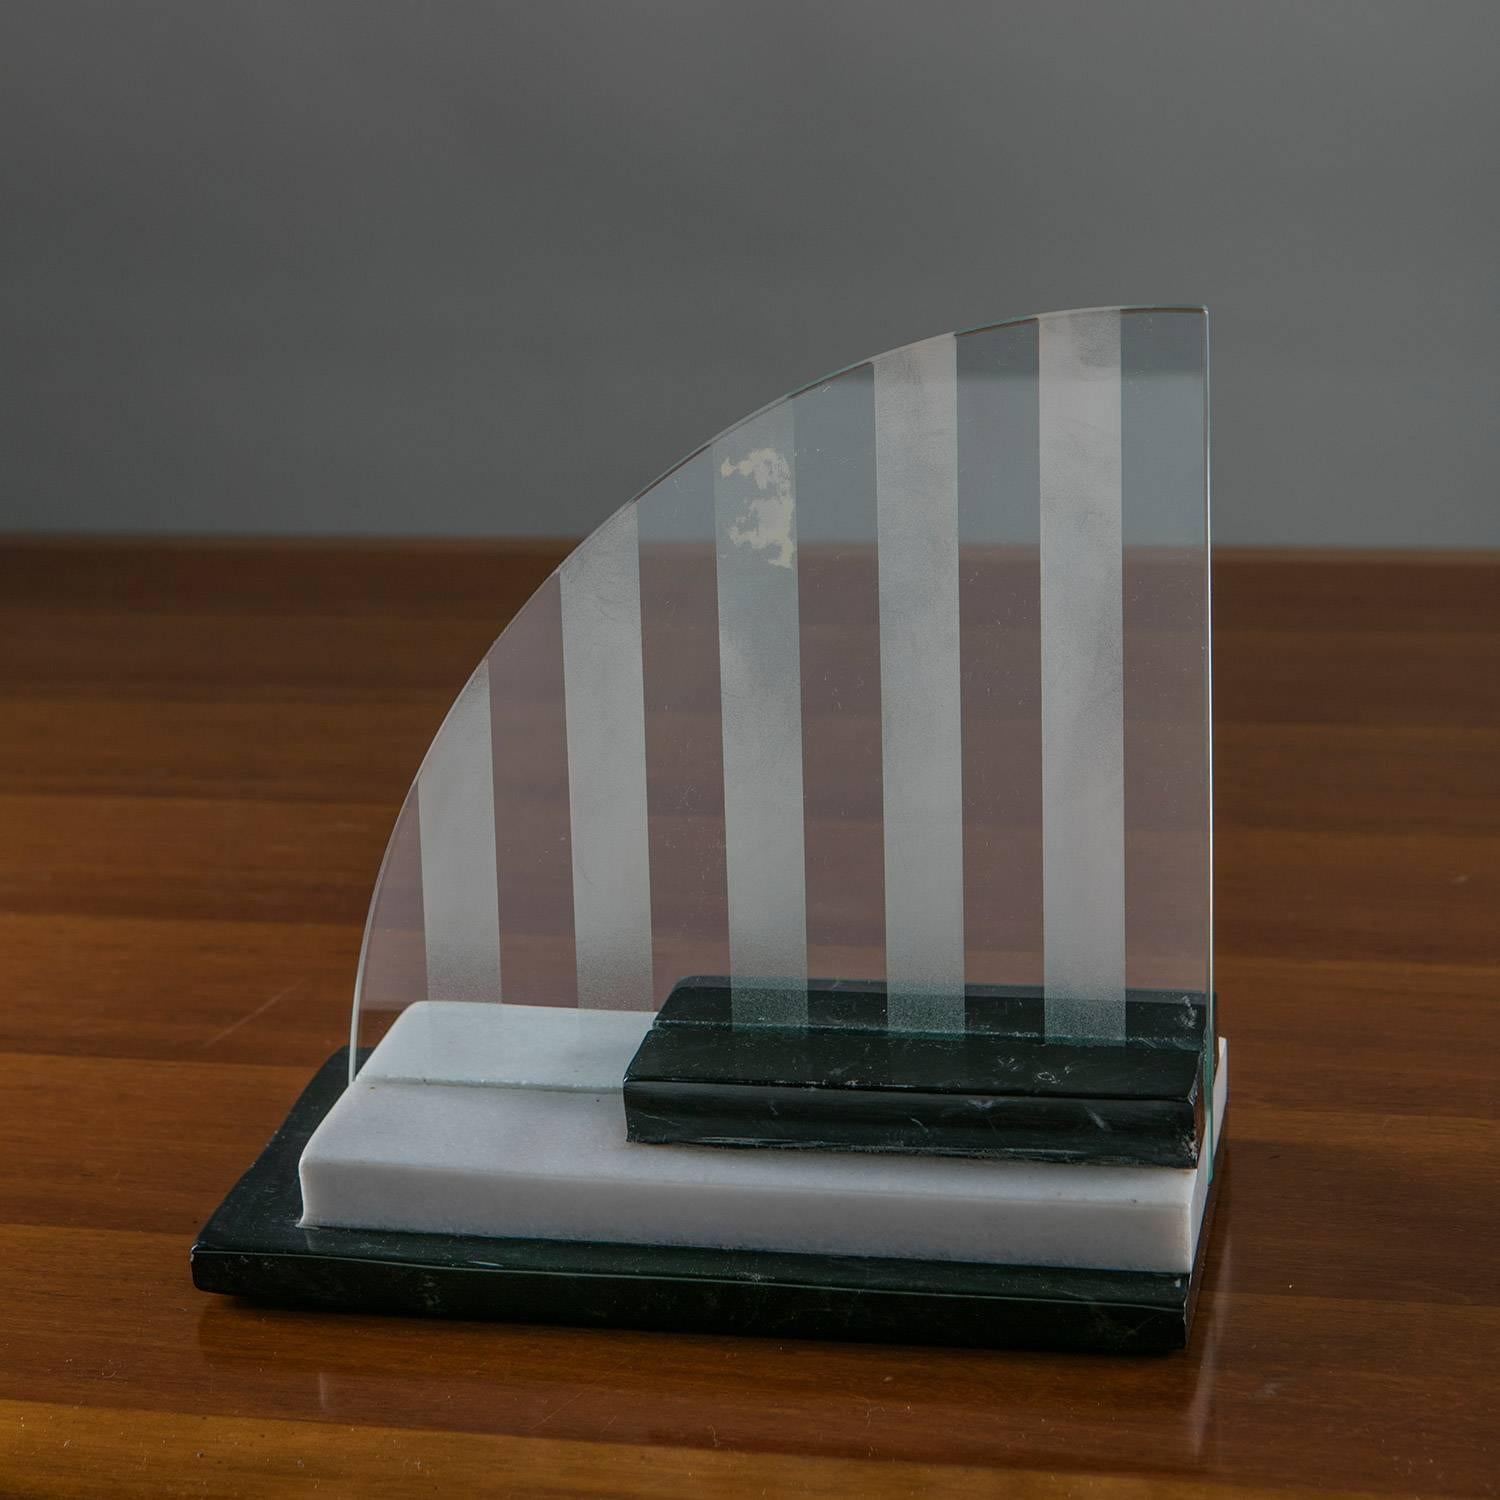 Italian marble picture frame / centerpiece manufactured by Skipper.
Three marble slabs host the curved shape glass with sandblasted and transparent stripes.